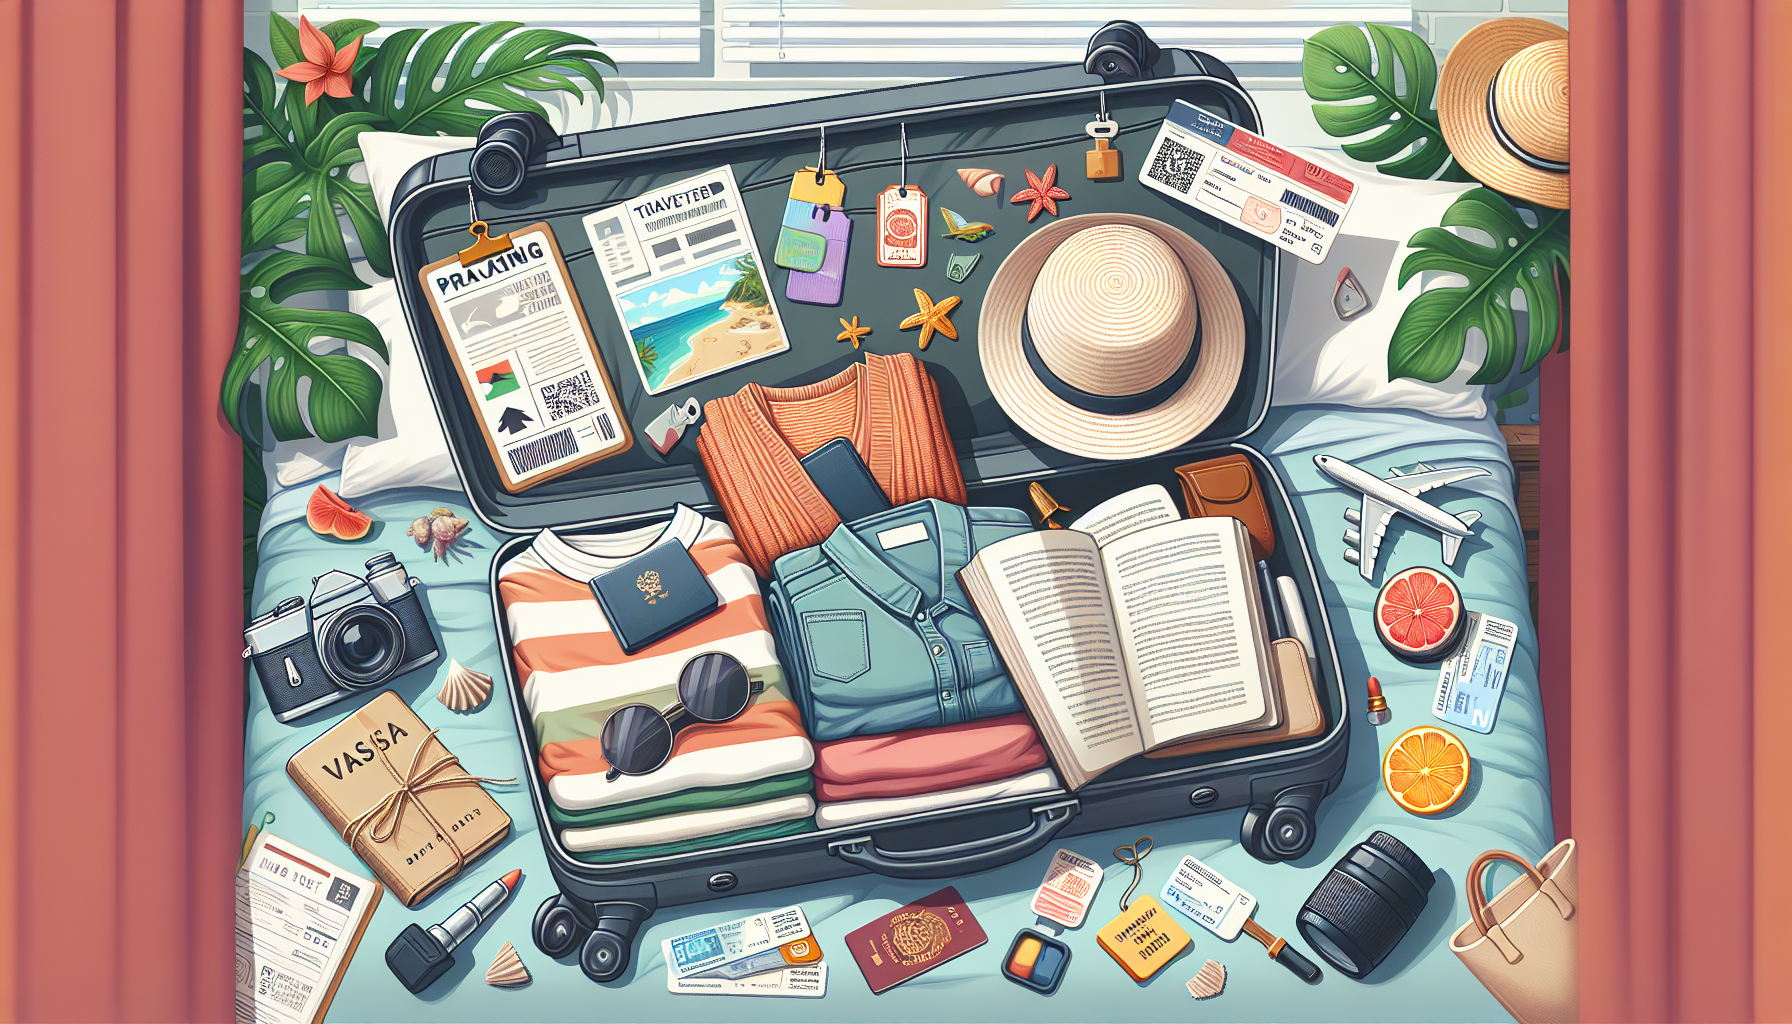 discover the best packing tips for a stress-free trip in our travel blog. get expert advice on how to pack efficiently and make your travel experience enjoyable and hassle-free.